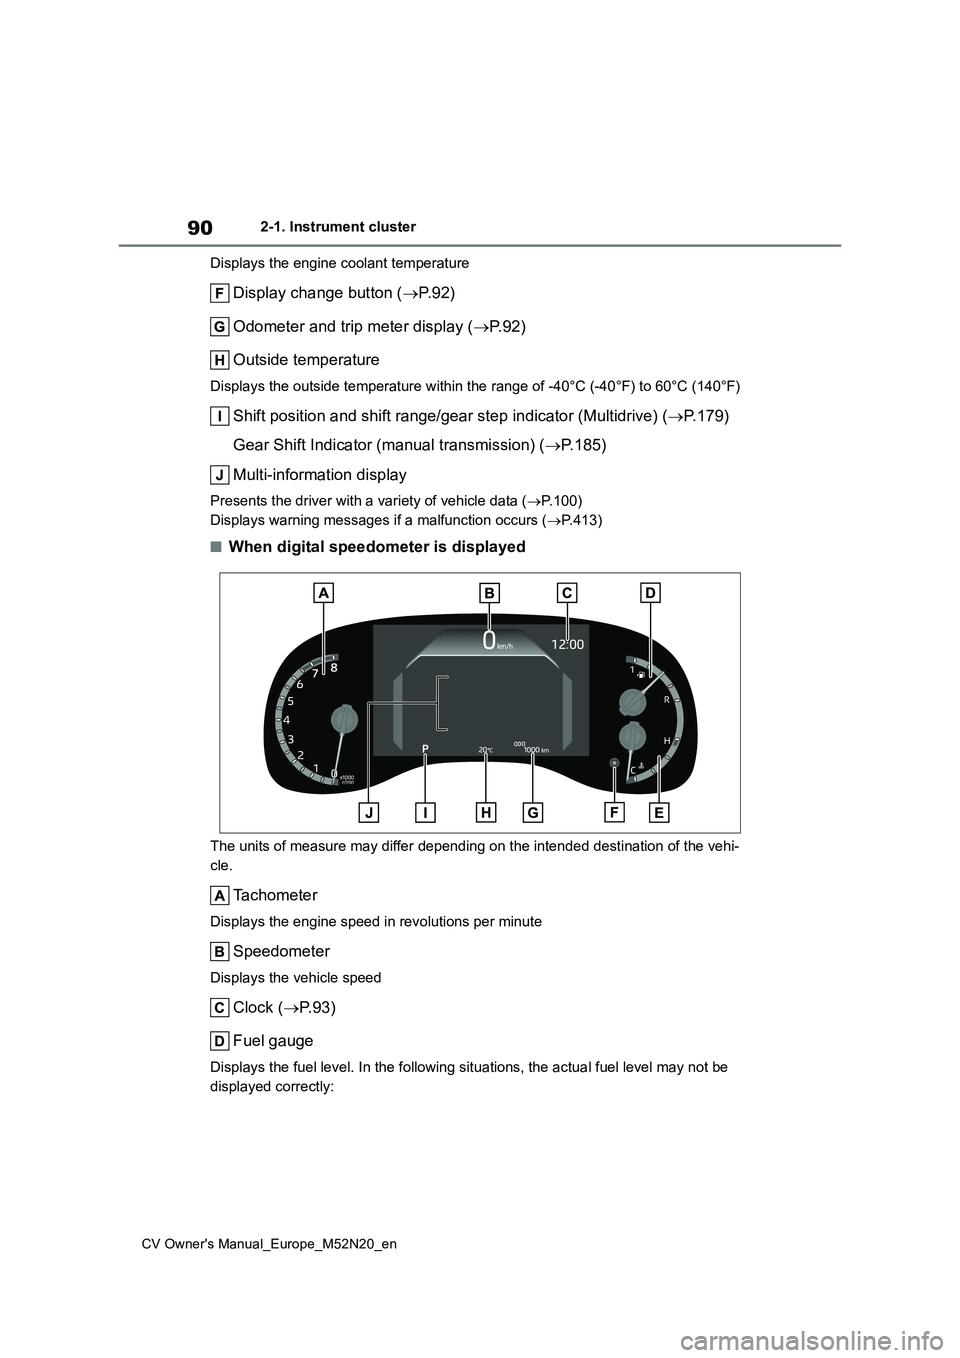 TOYOTA YARIS CROSS 2022  Owners Manual 90
CV Owner's Manual_Europe_M52N20_en
2-1. Instrument cluster 
Displays the engine coolant temperature
Display change button ( P. 9 2 ) 
Odometer and trip meter display ( P. 9 2 ) 
Outside t